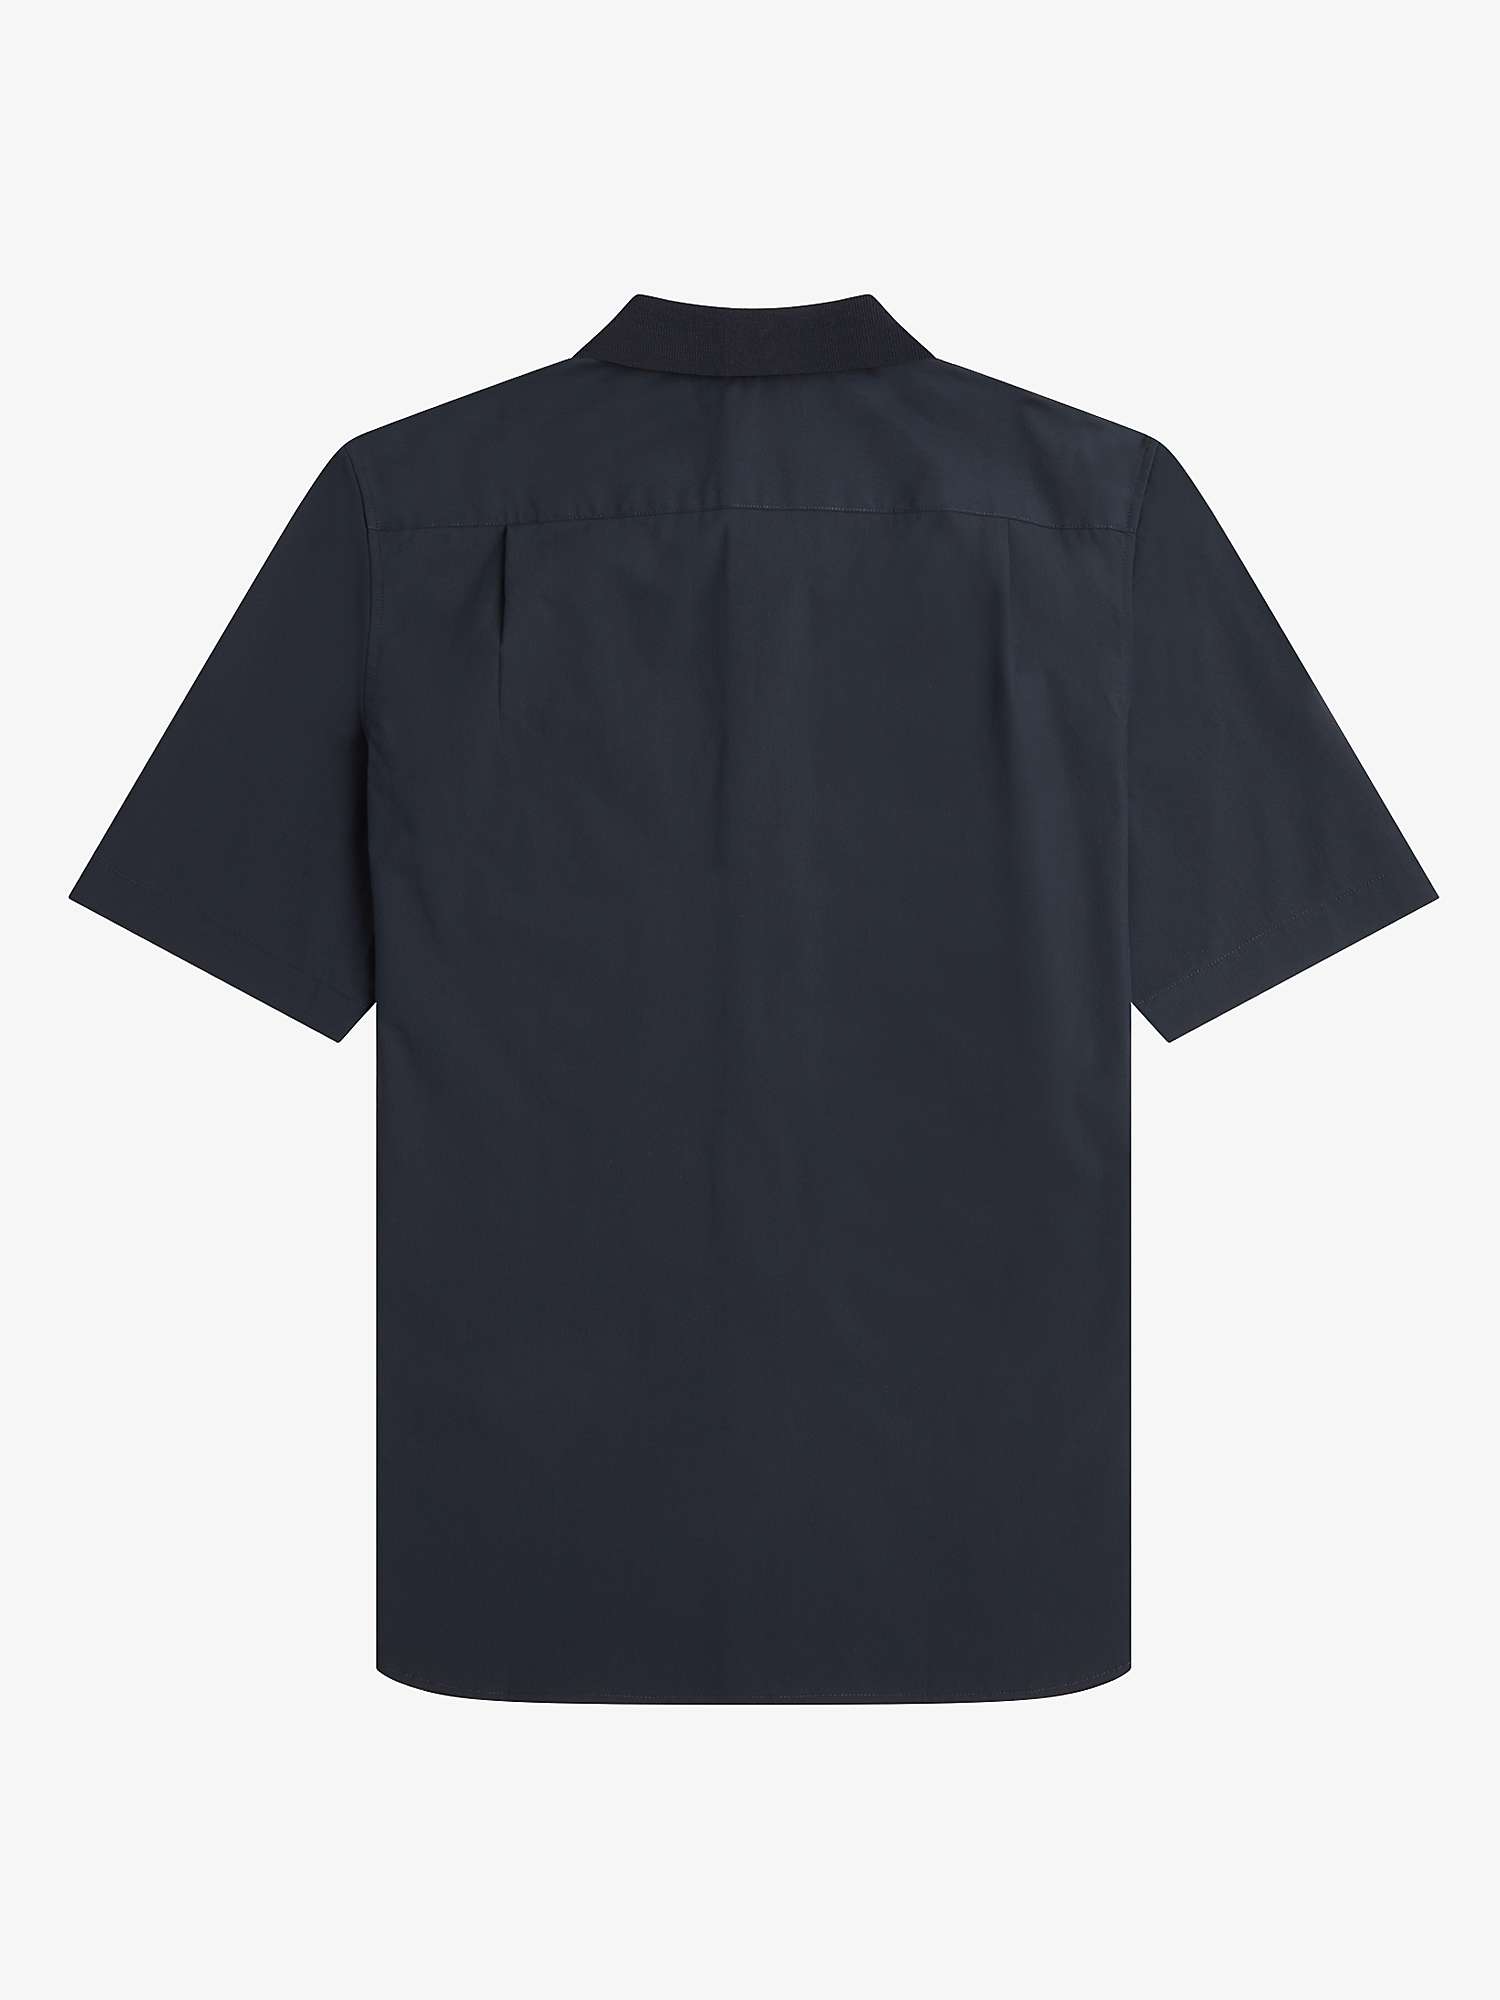 Fred Perry Short Sleeve Knit Collar Shirt, Navy at John Lewis & Partners